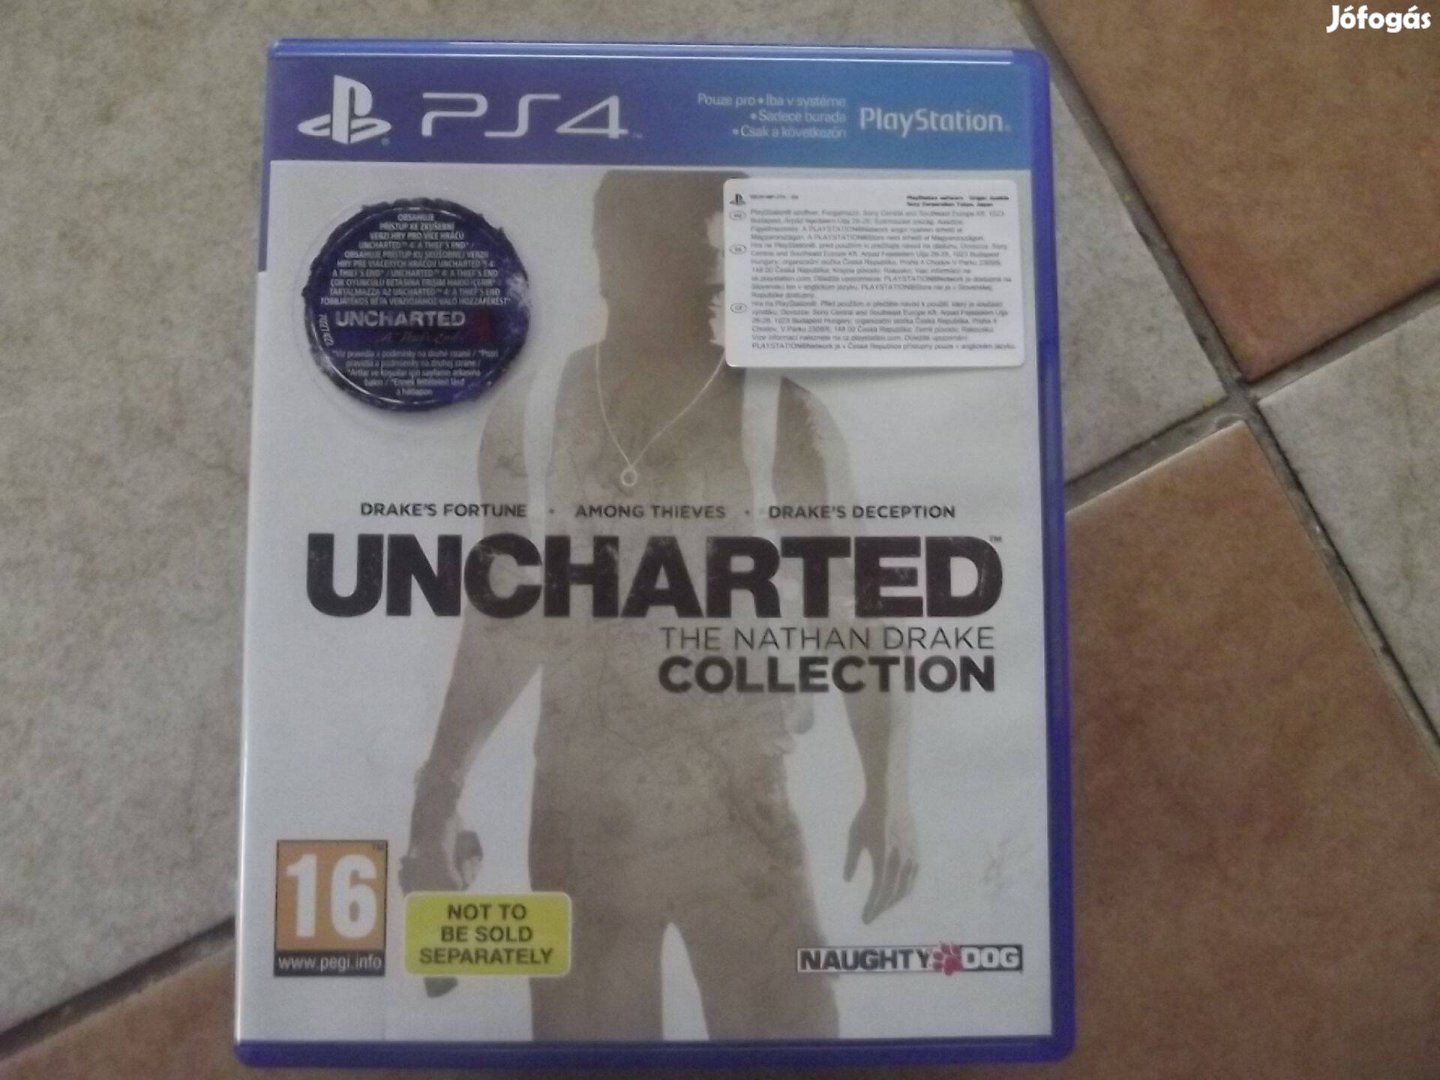 Ps4-90 Ps4 eredeti Játék : Uncharted The Nathan Drake Collection